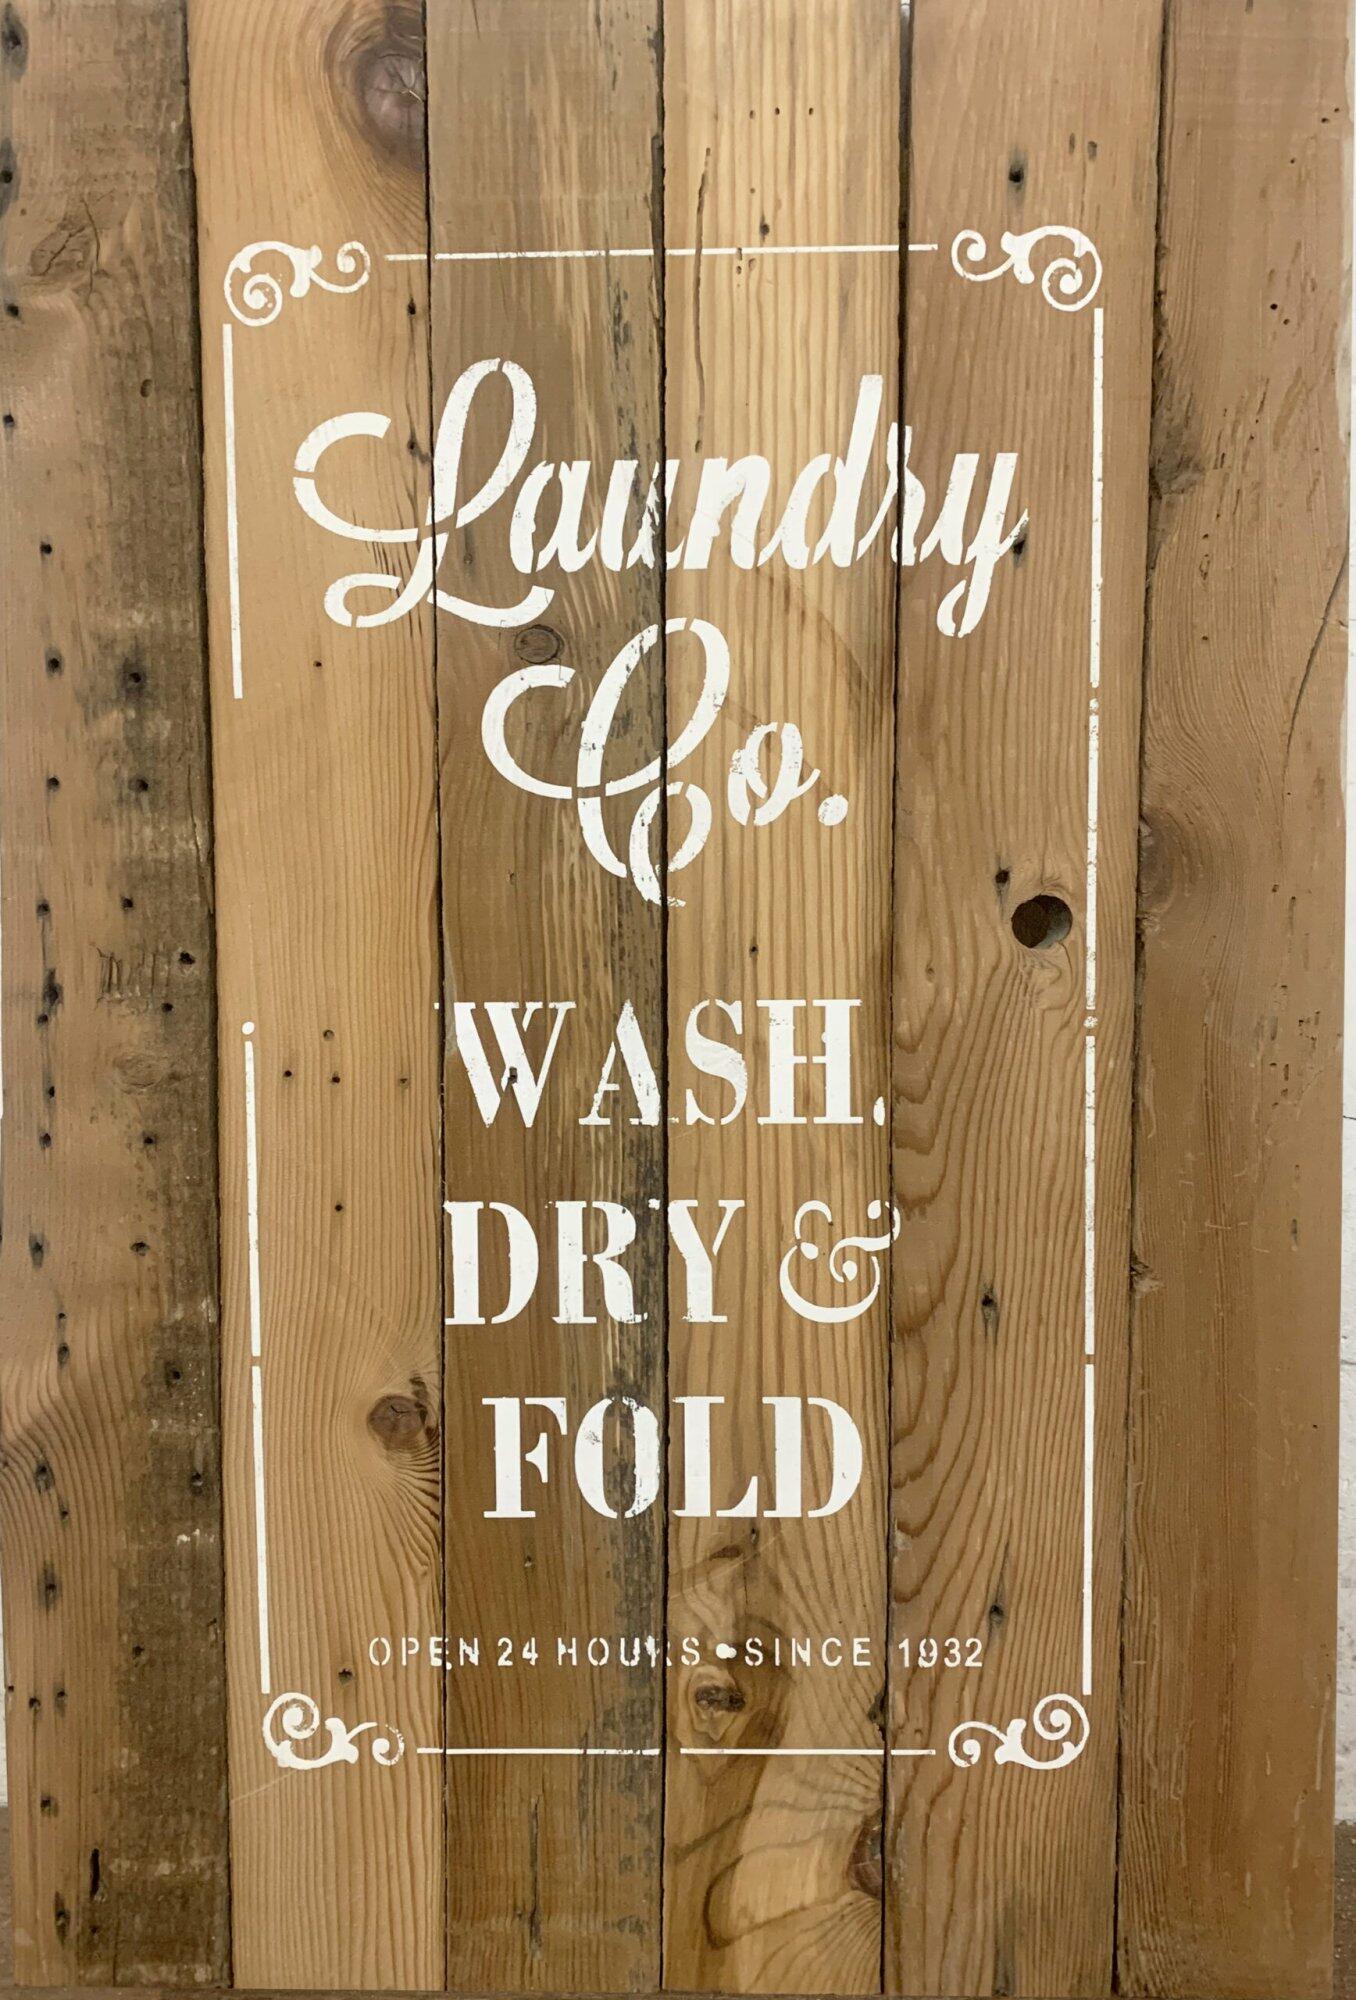 close up of stamped paint design centered on natural and reclaimed barnwood strips put together to create a sign. Design reads Laundry Co. Wash, Dry, & Fold. Open 24 hours since 1932. Text on sign is outlined with scroll design on corners and simple lines. Wood has distressed characteristics.